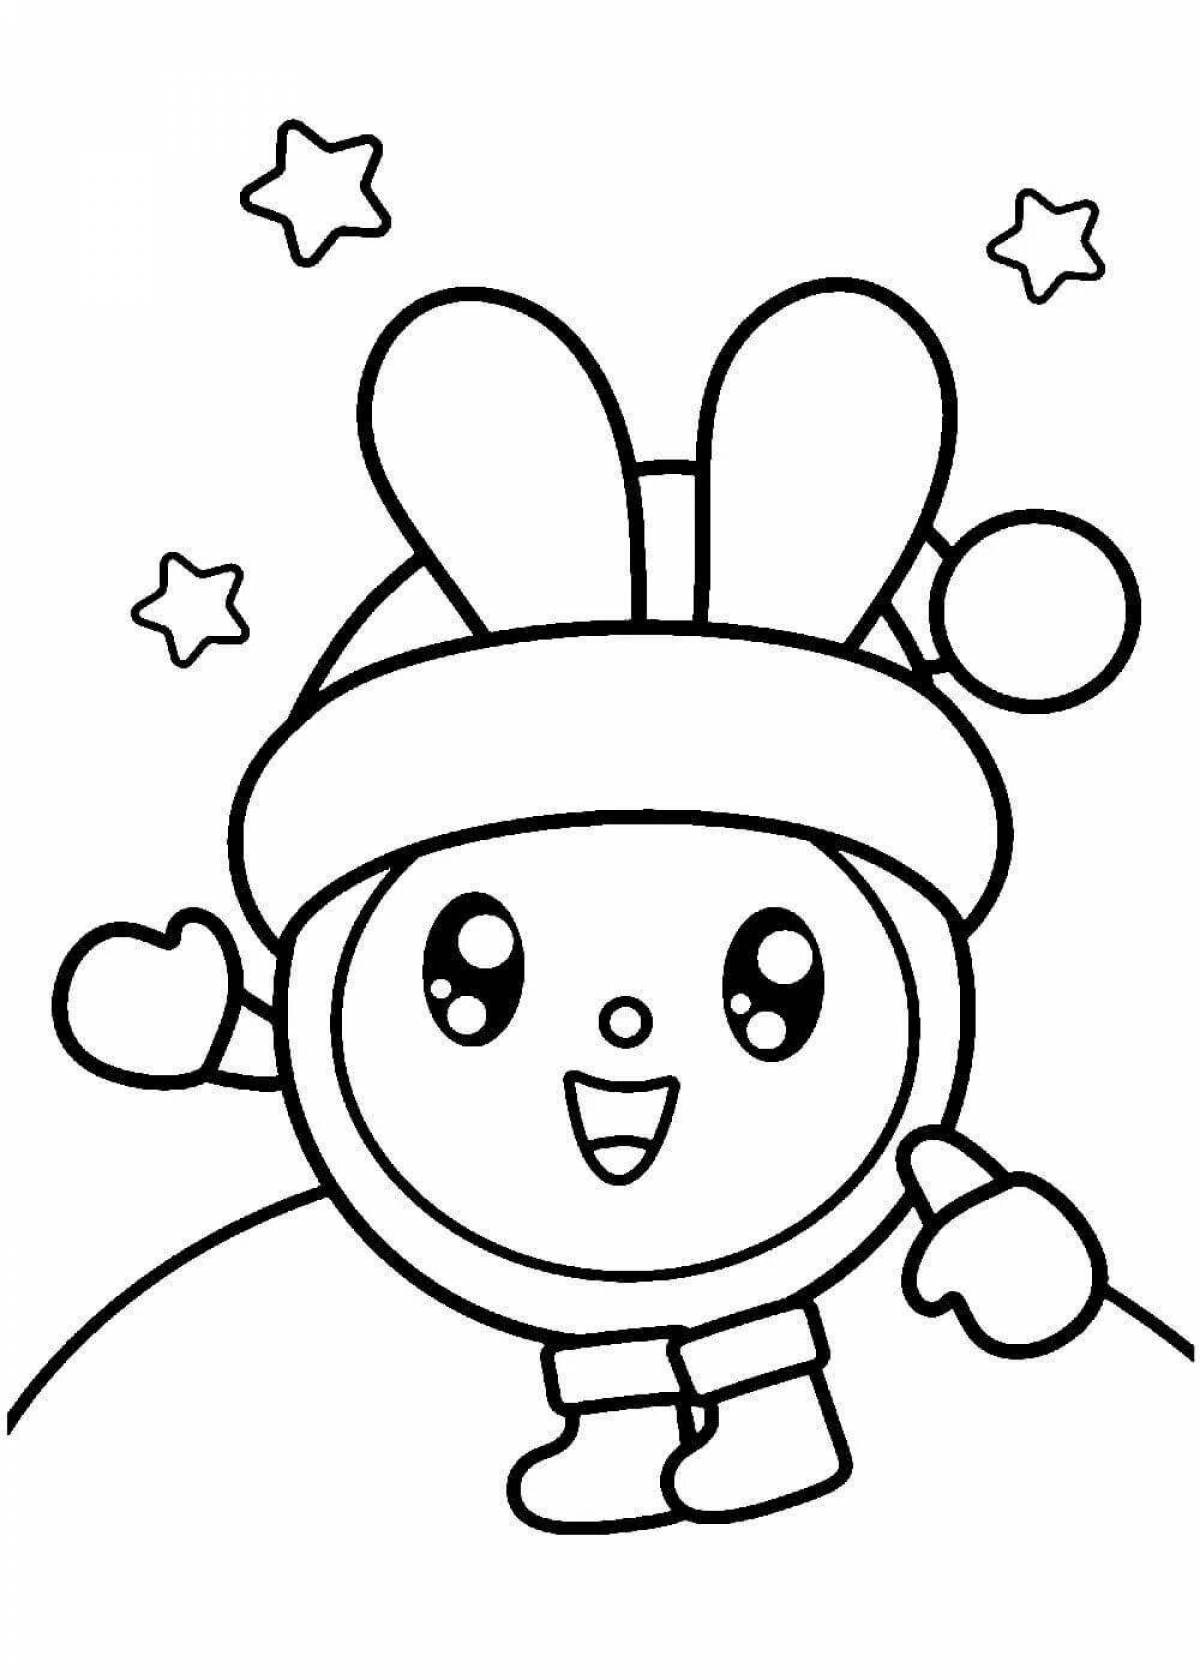 Colorful bonda coloring page all the kids together